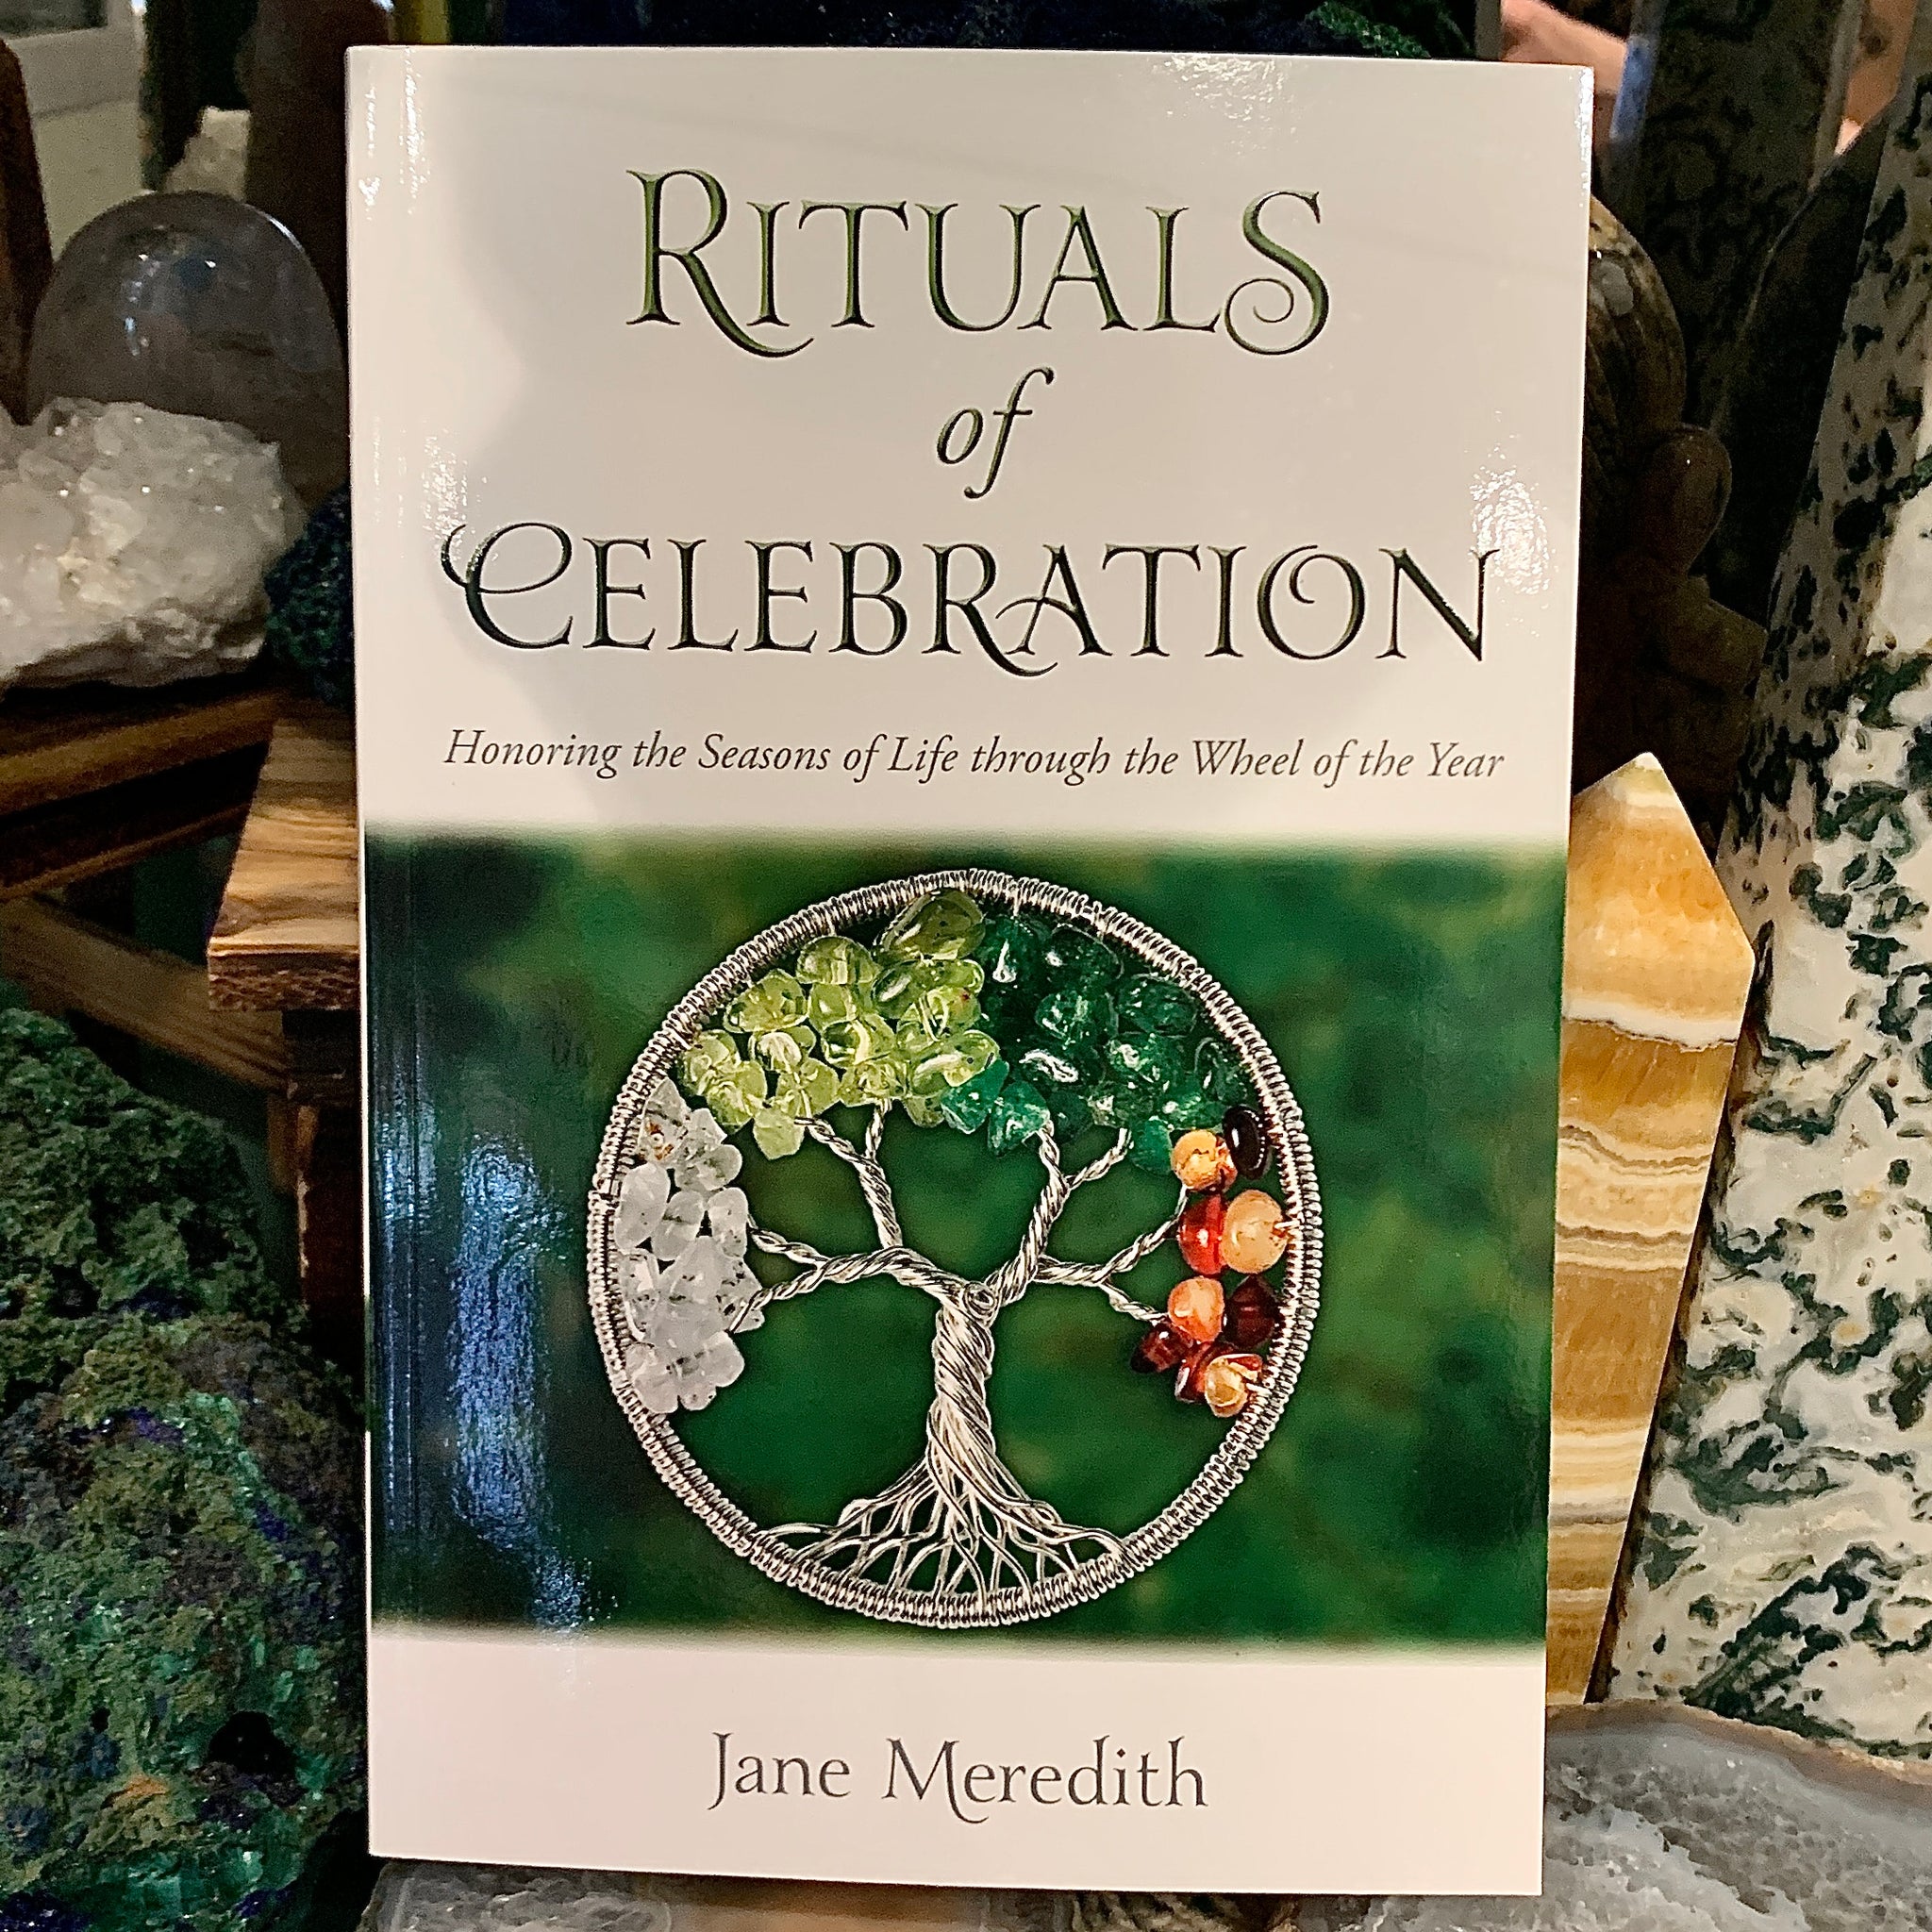 Rituals of Celebration by Jane Meredith